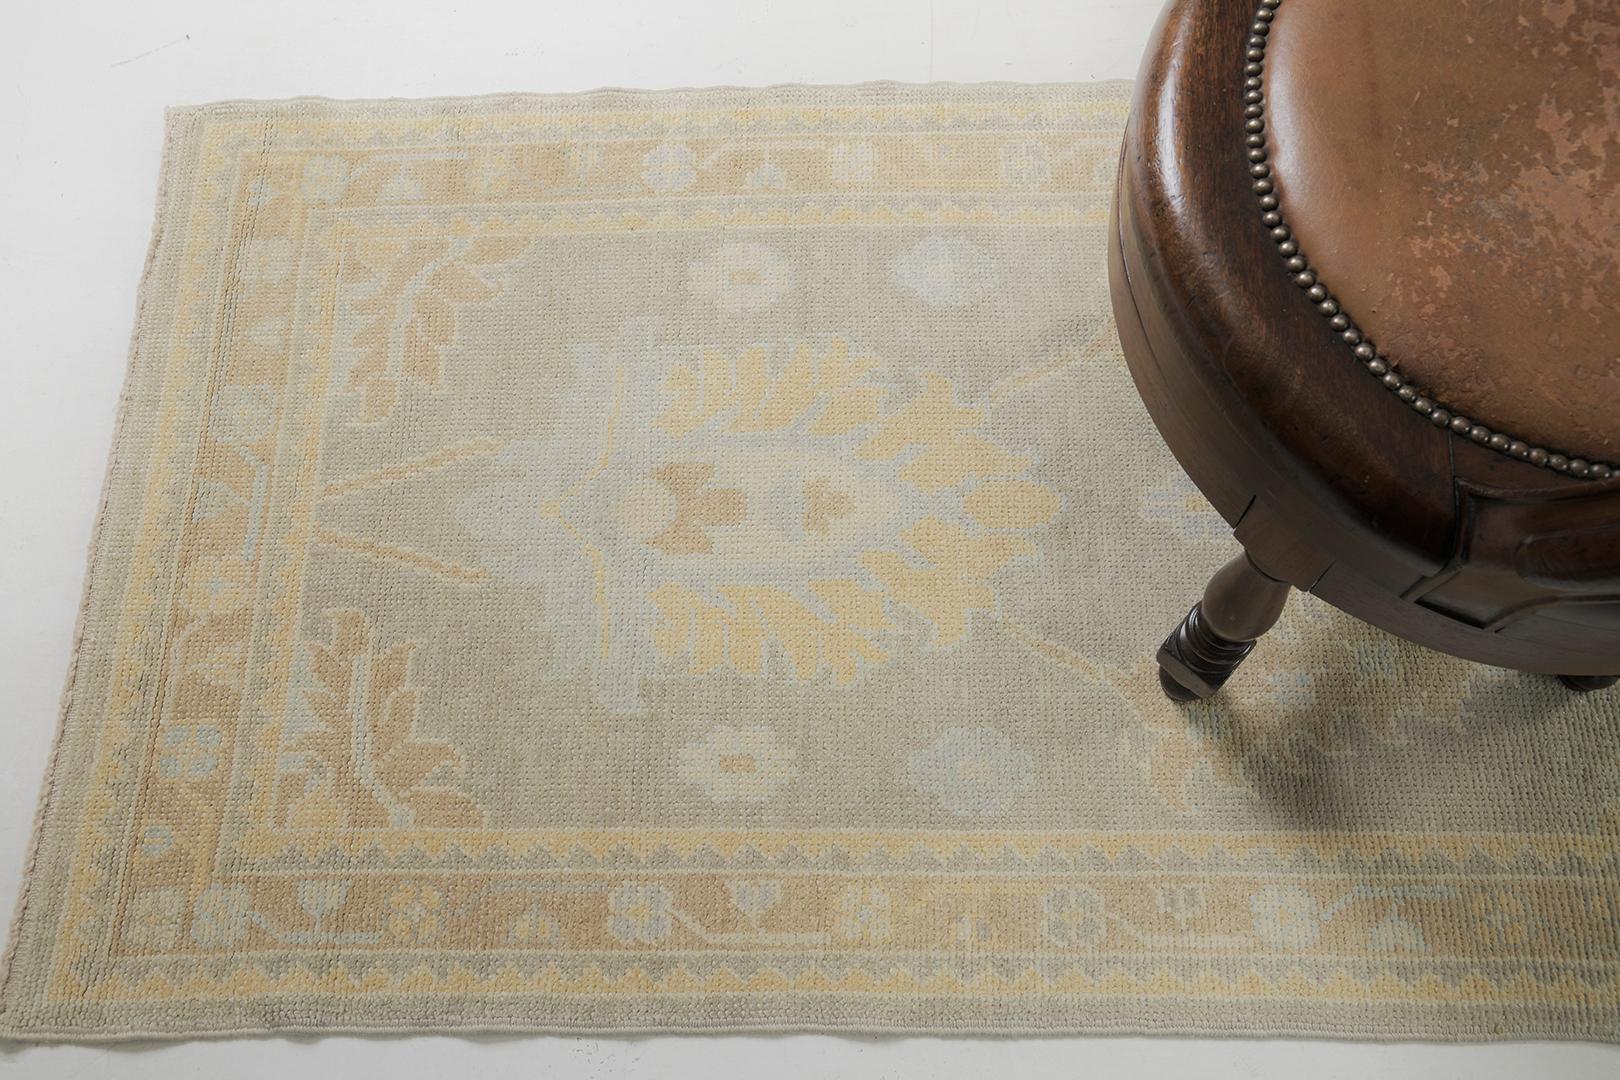 A remarkable Turkish Oushak revival rug that has an illustration of a dainty blossoming vibe. Distinctive palmettes, graceful peonies, and connecting twigs are highlighted in elegance in the stunning shades of gold, sage, coffee, and light blue